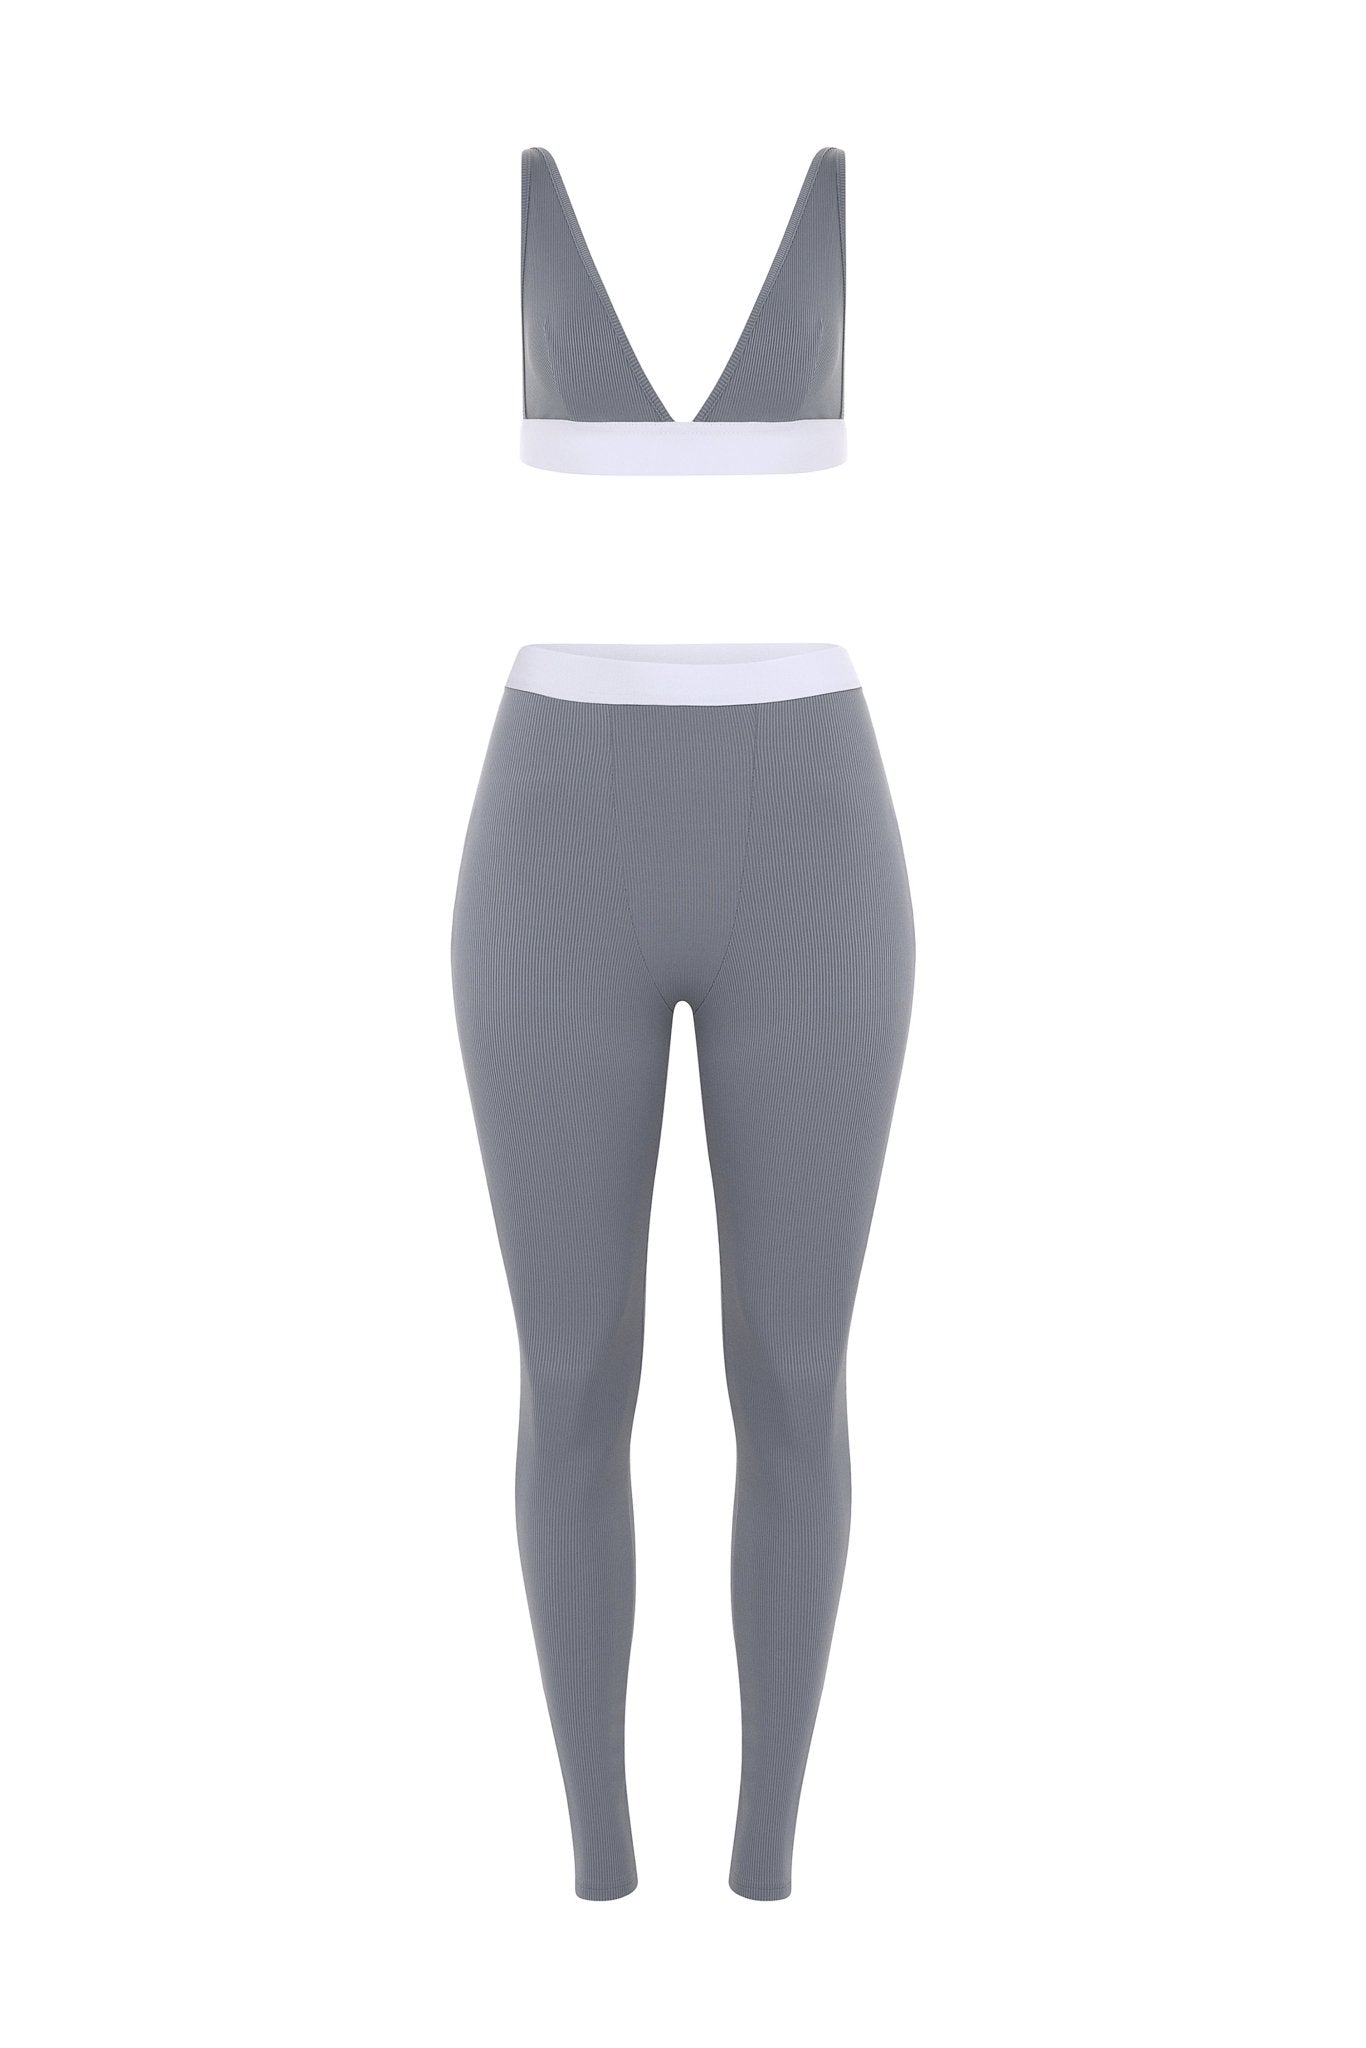 Liss Grey Two Piece Legging Set | YG Collection – YG COLLECTION